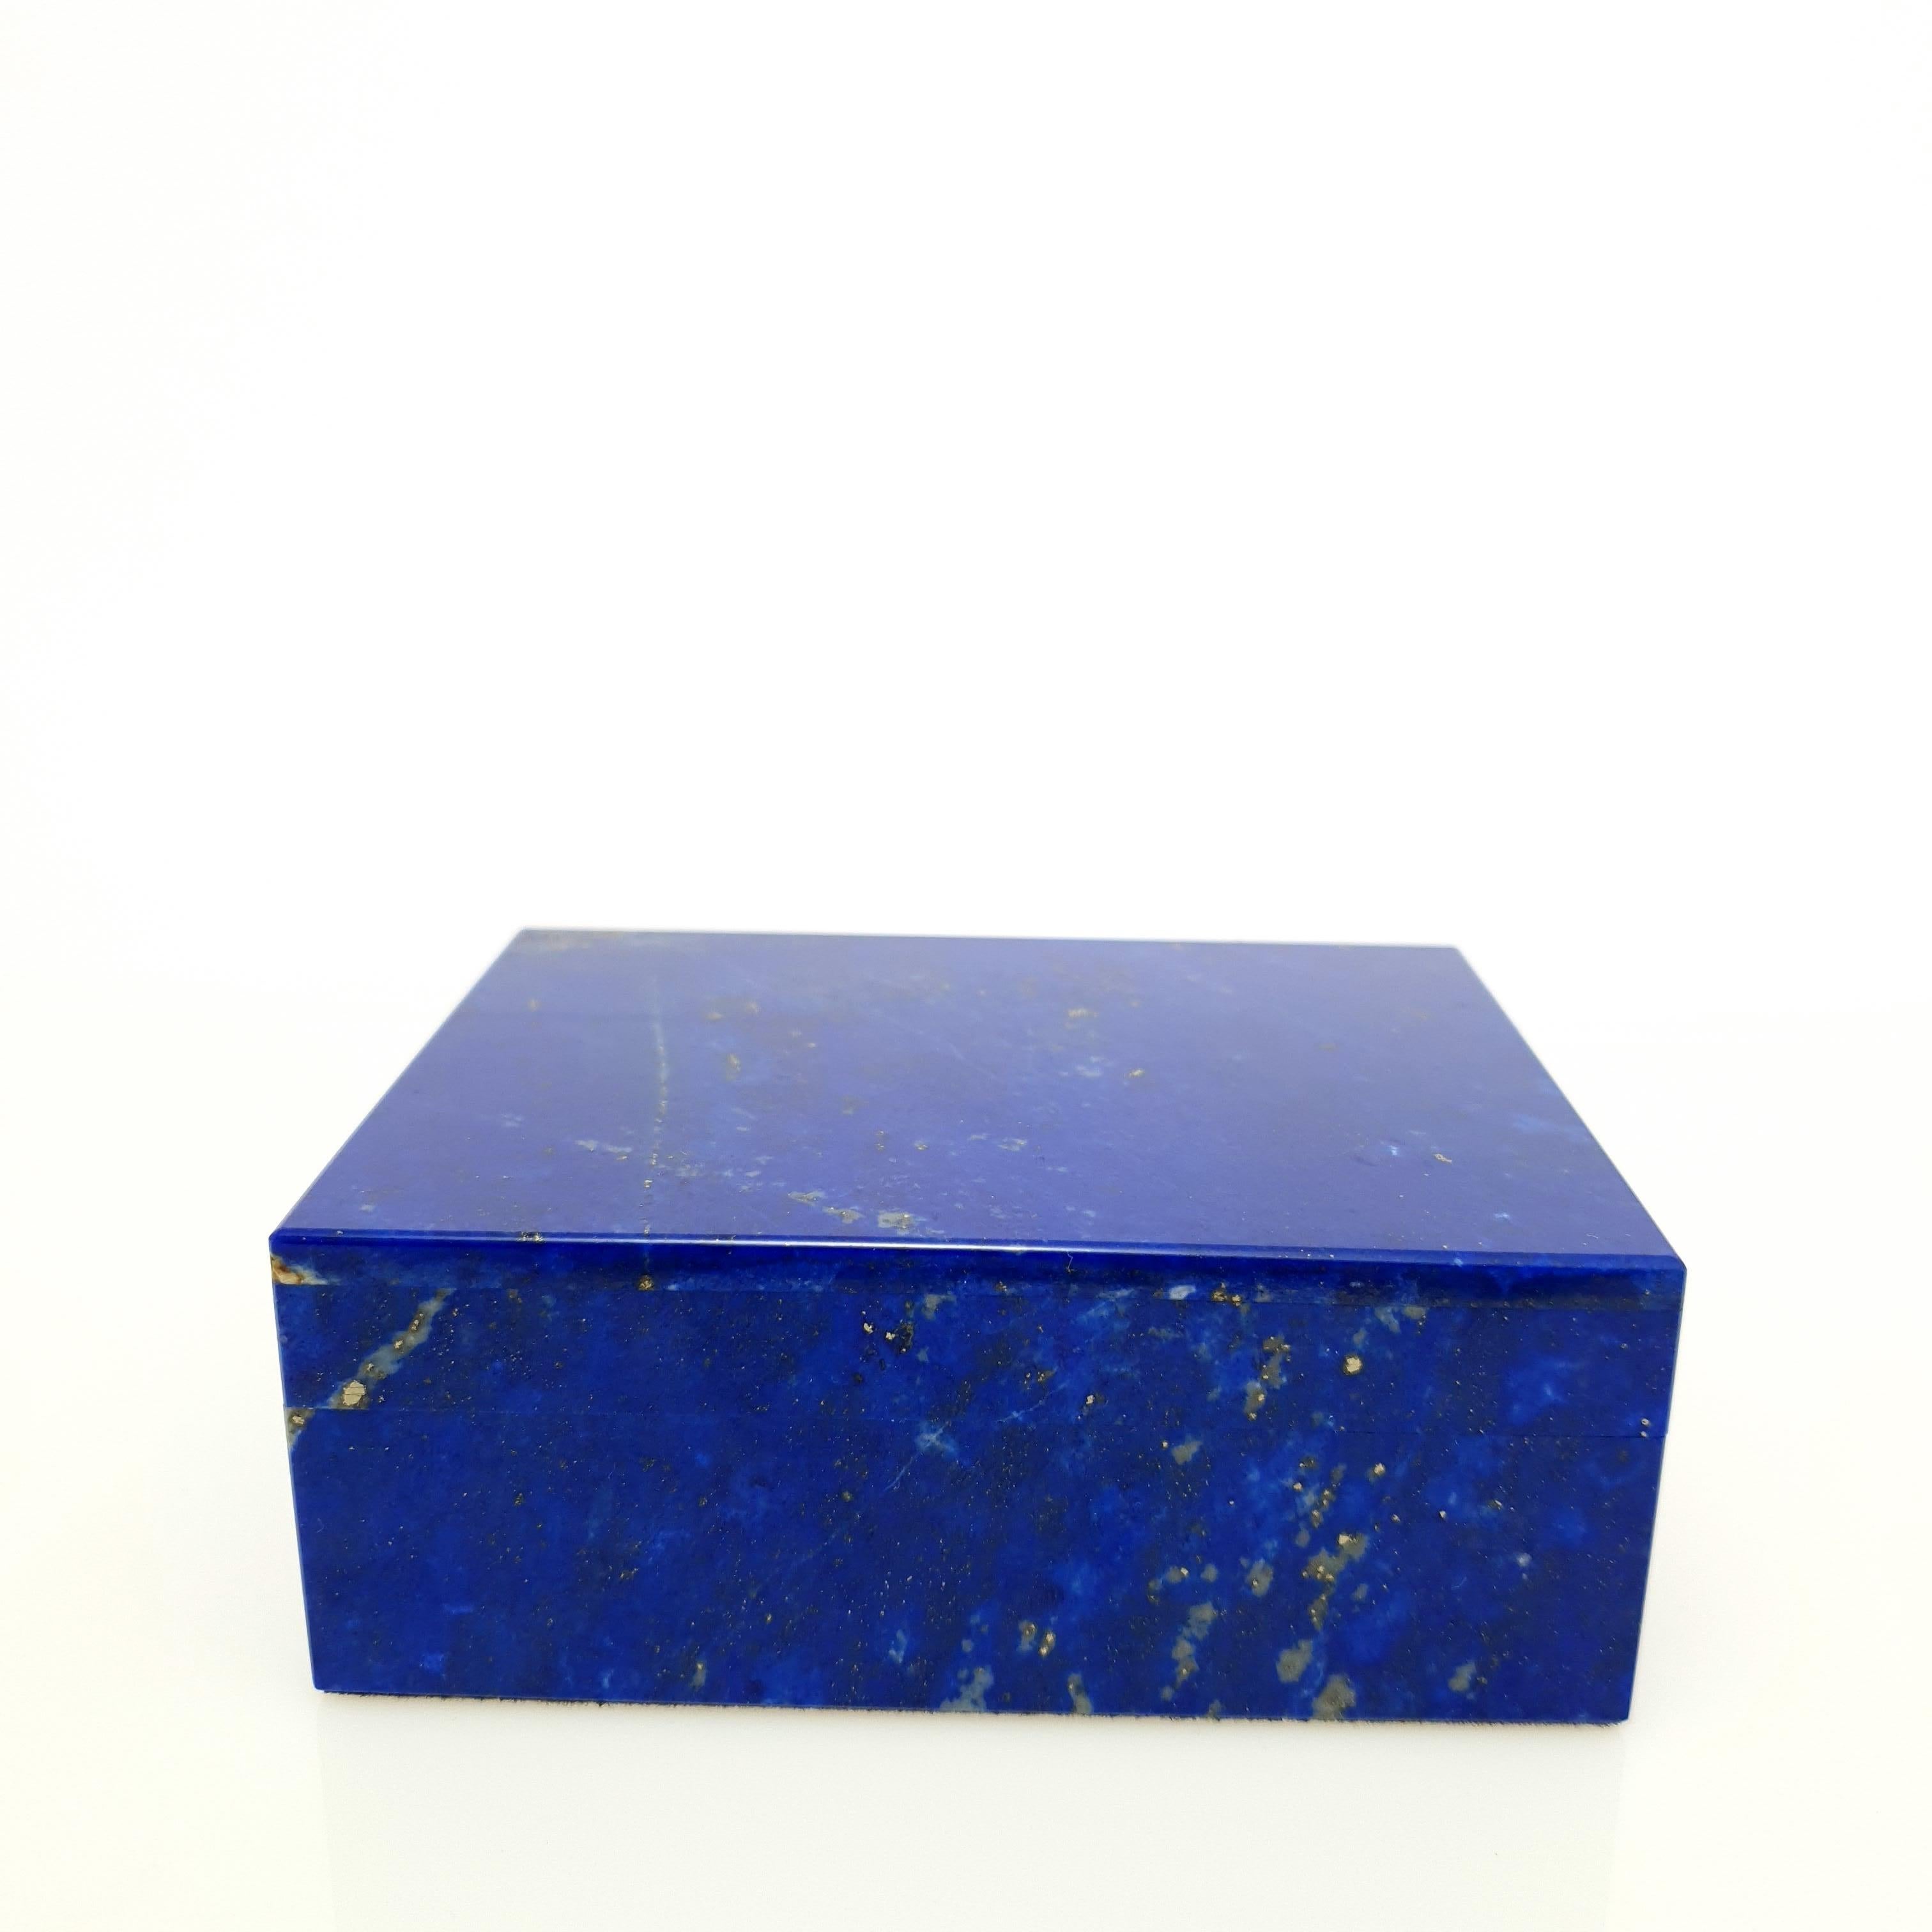 A handmade Natural White Blue Lapis Lazuli Decorative Jewelry Box.
The pattern looks like an artful painting of nature and the gold-colored pyrite sparkles beautifully.
It should be emphasized that the top plate is made from one piece and not